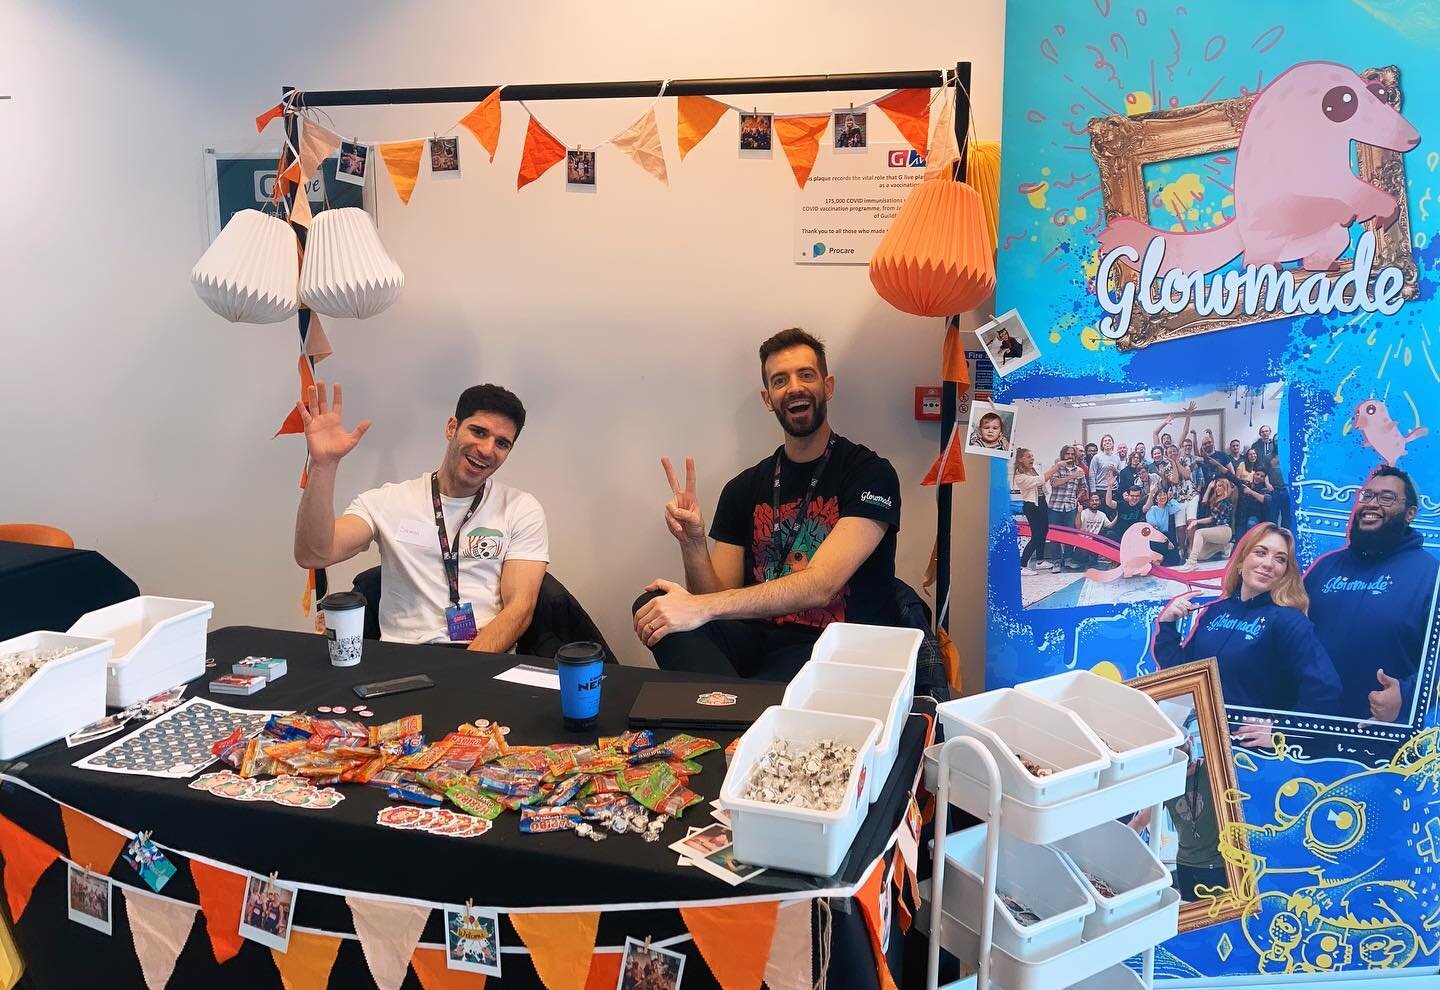 Me, oh my, what a DAY @guildford.games Fest was!!! It was beyond marvellous to see so many people who love games all in one place ❤️ Thank you to everyone who came by and grabbed some merch, had a great chat, or cheered us on in our panels! Above all